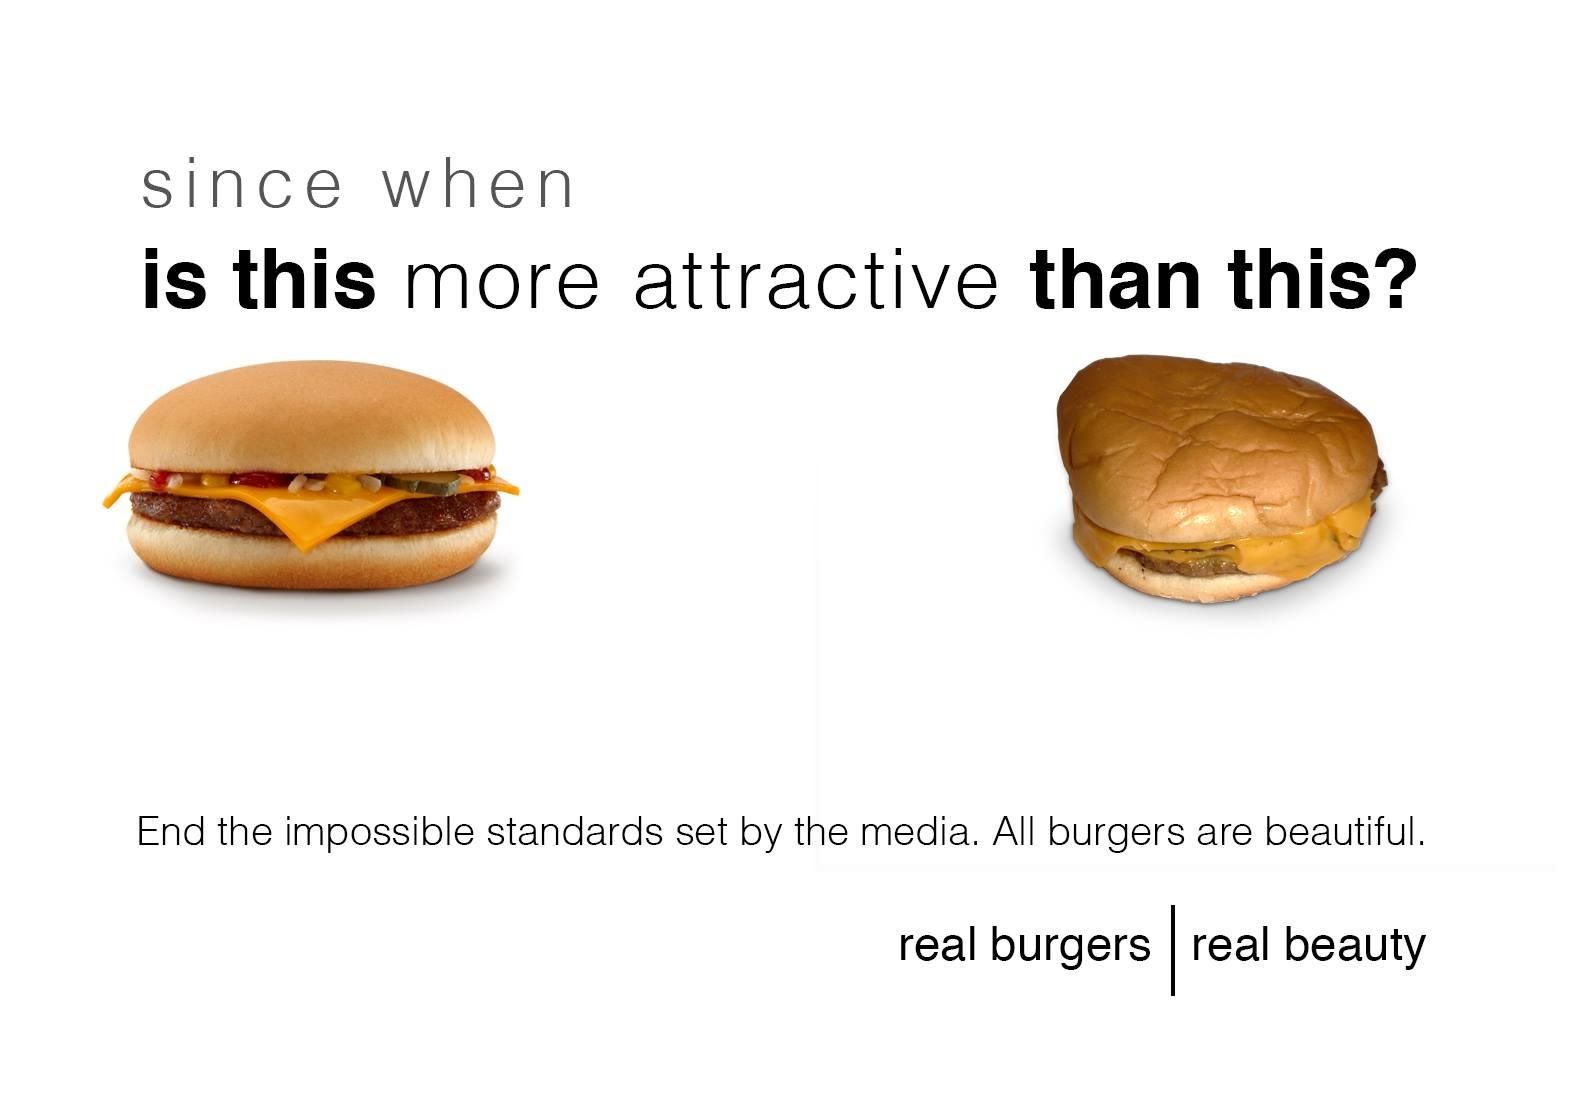 All burgers are beautiful.